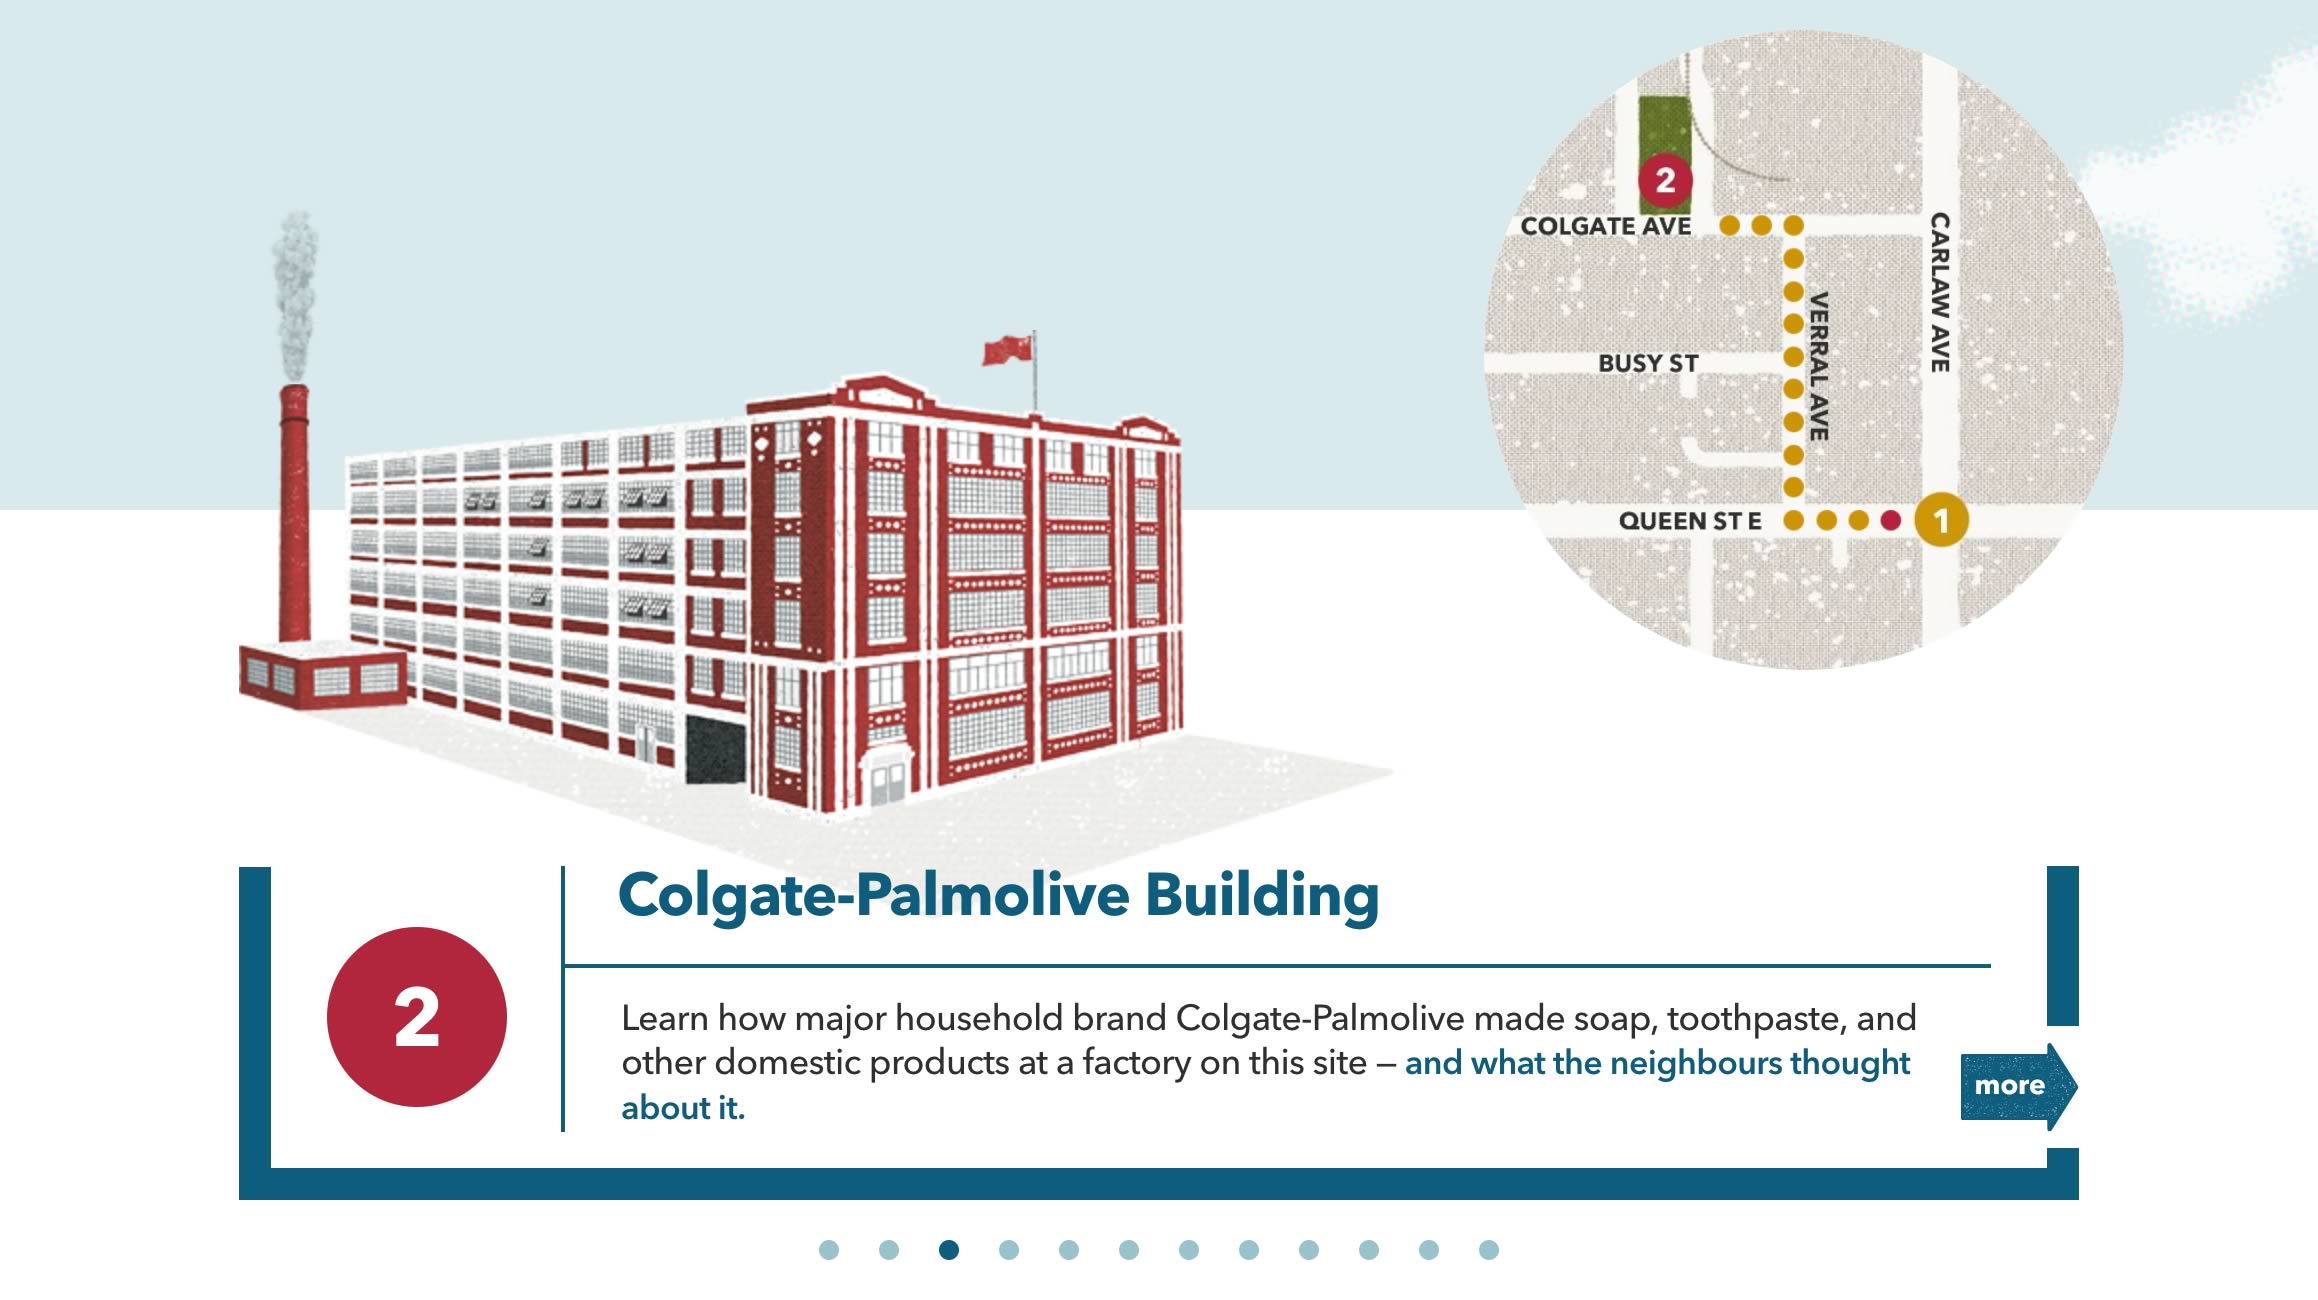 Capture of the homepage tour navigation modal window from the Made in Toronto tour/website ('Colgate-Palmolive Building' stop displayed)